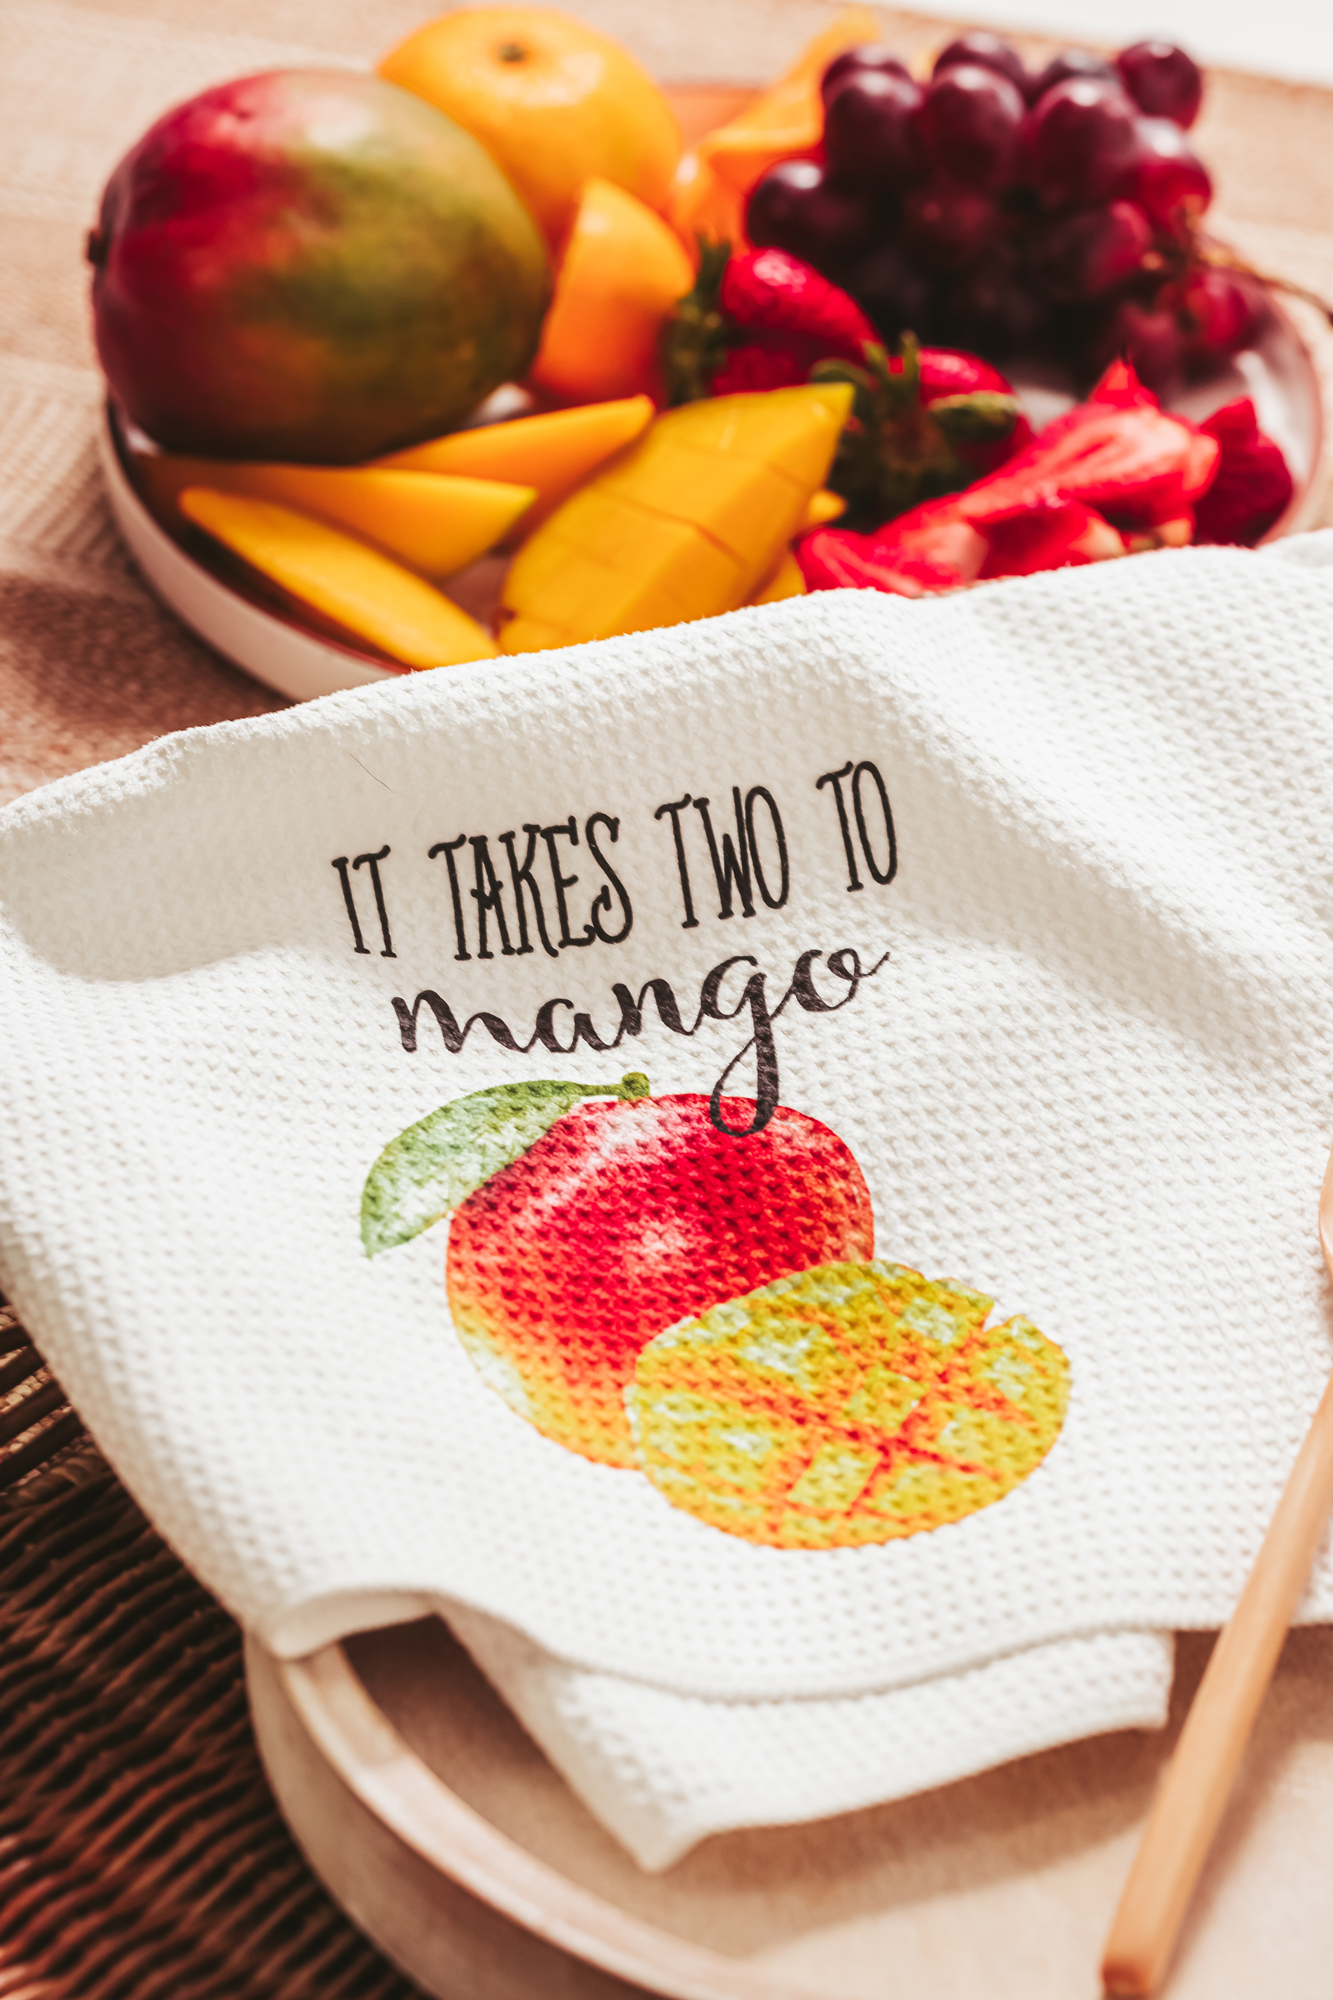 Vegetable Decor Funny Kitchen Towels – Do Take It Personally